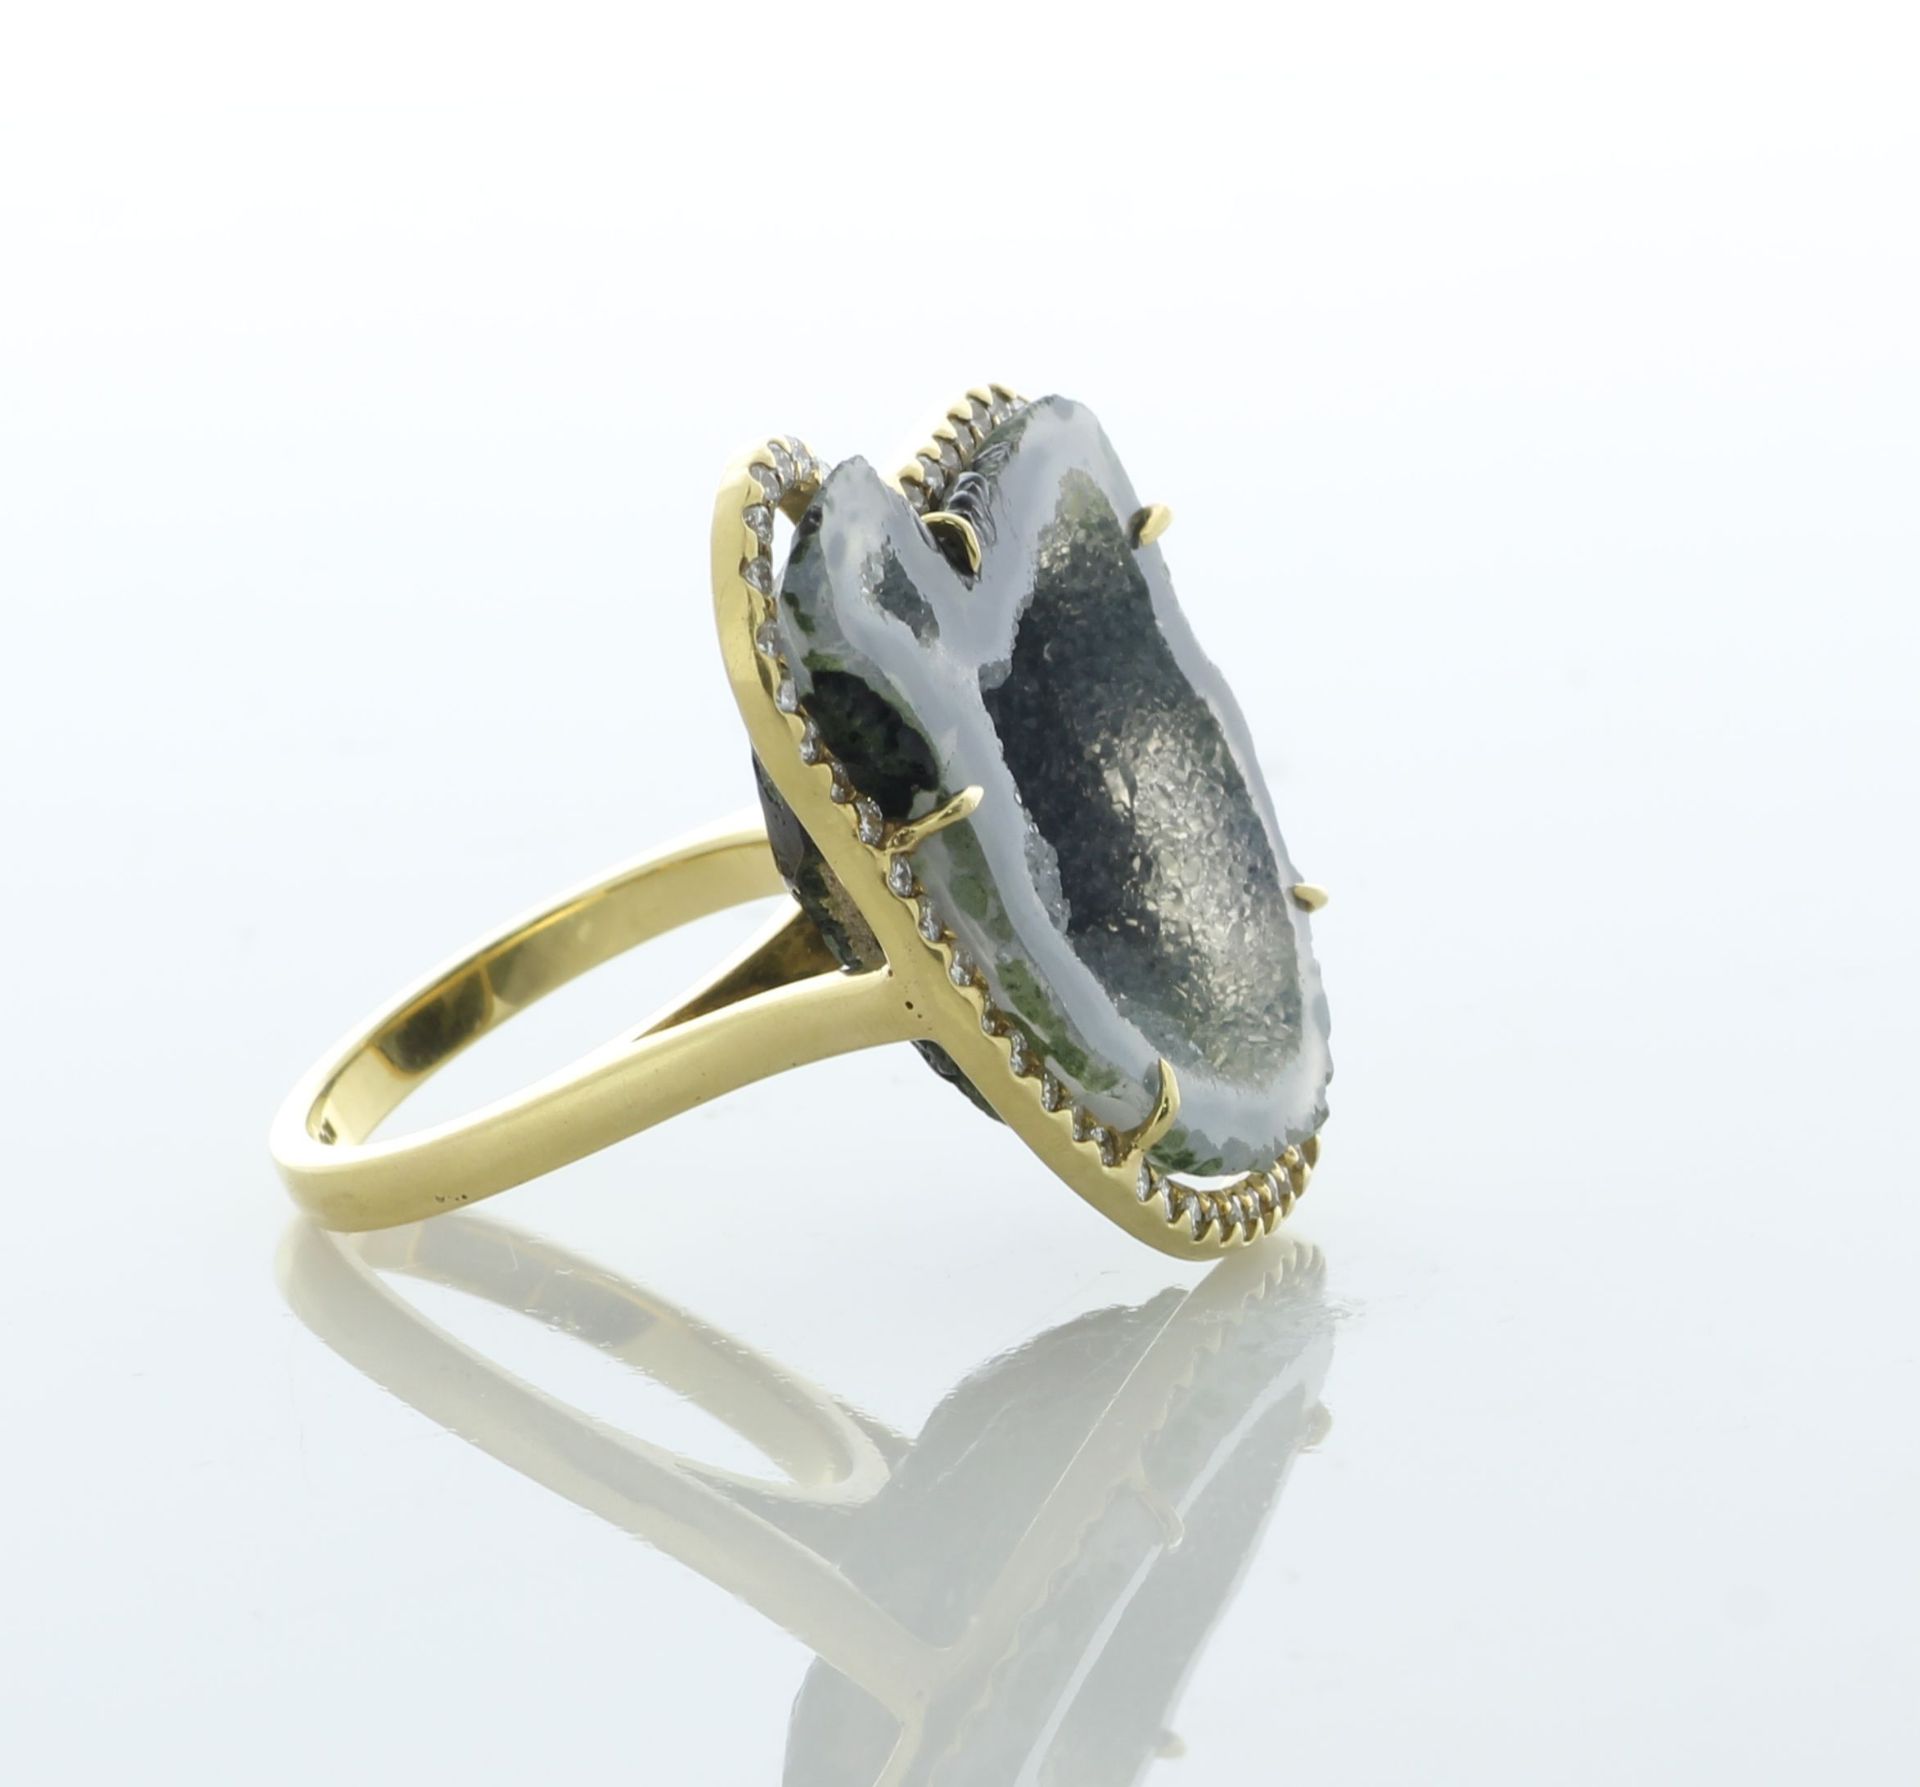 18ct Yellow Gold Diamond And Fossil Ring 0.60 Carats - Image 2 of 5